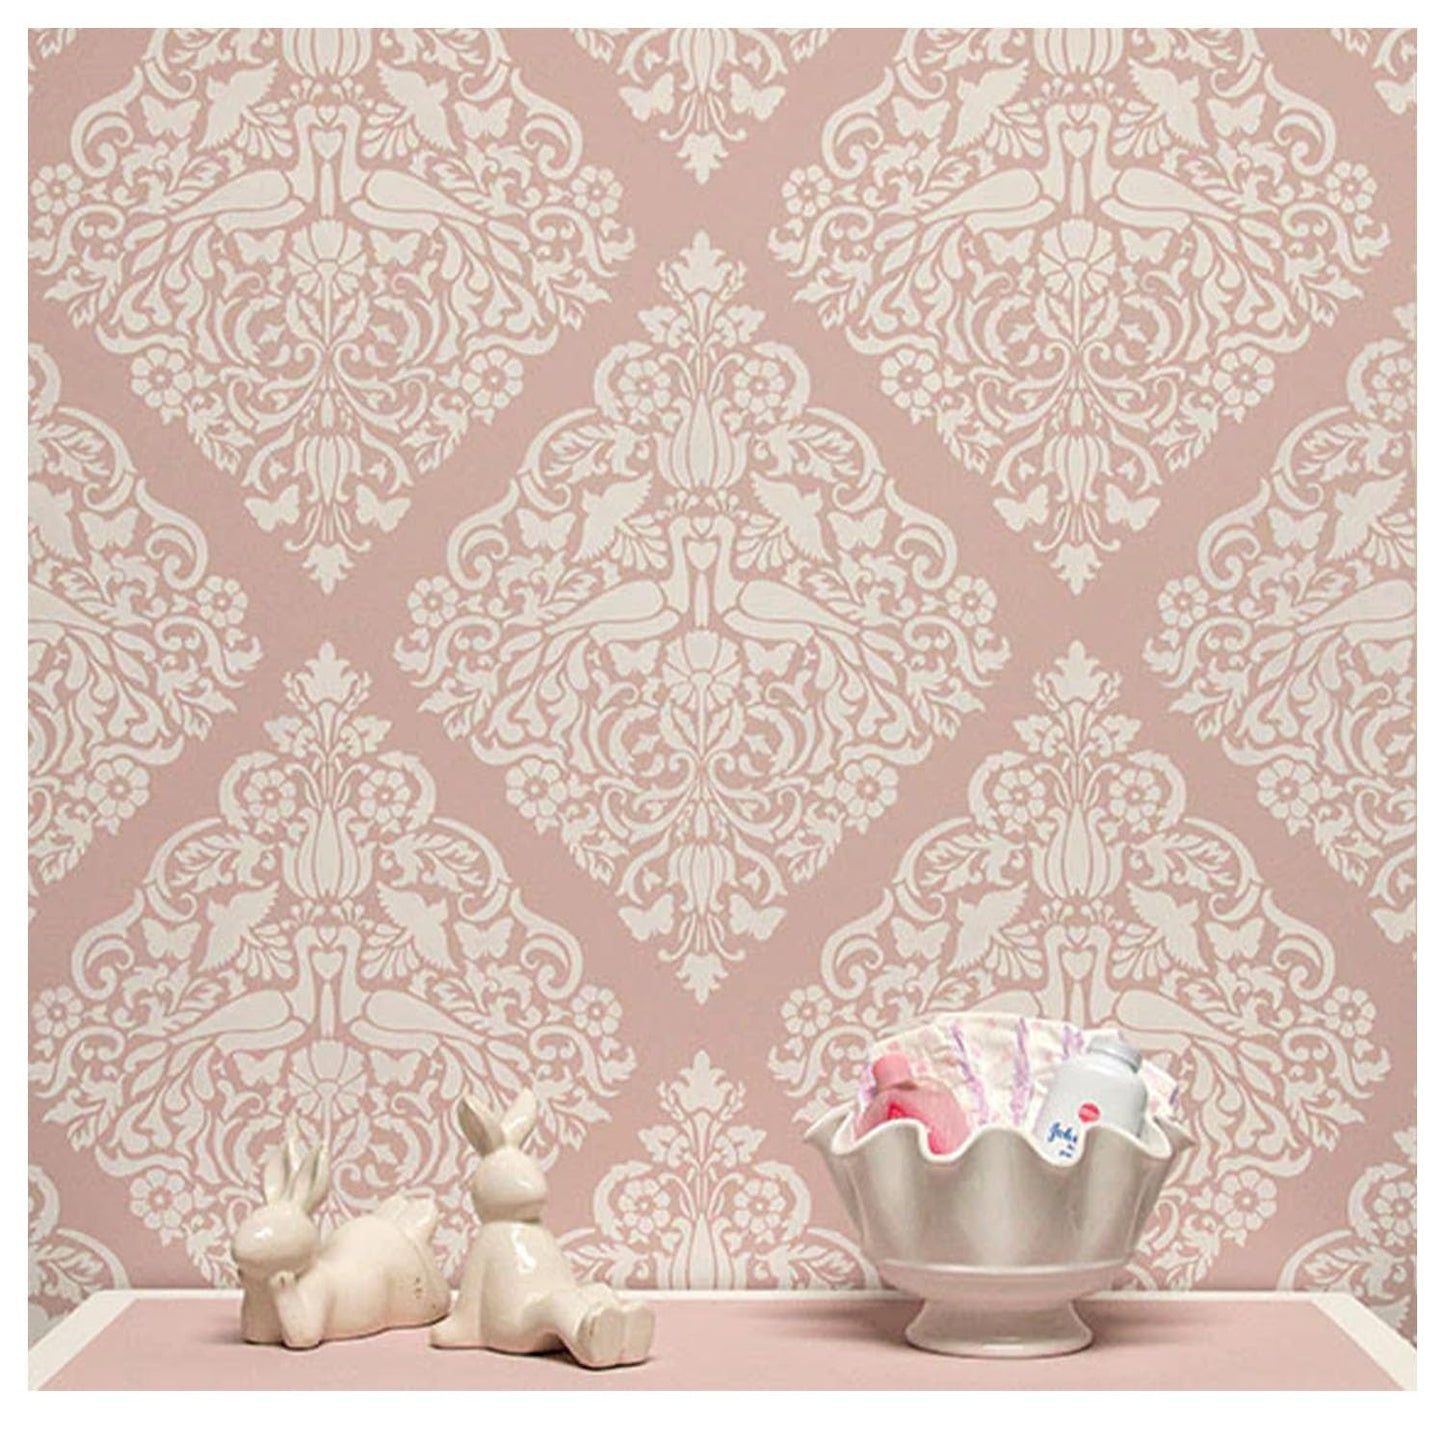 Latest Large Zoey Damask Paint Wall Stencil (KDRDSS1239)